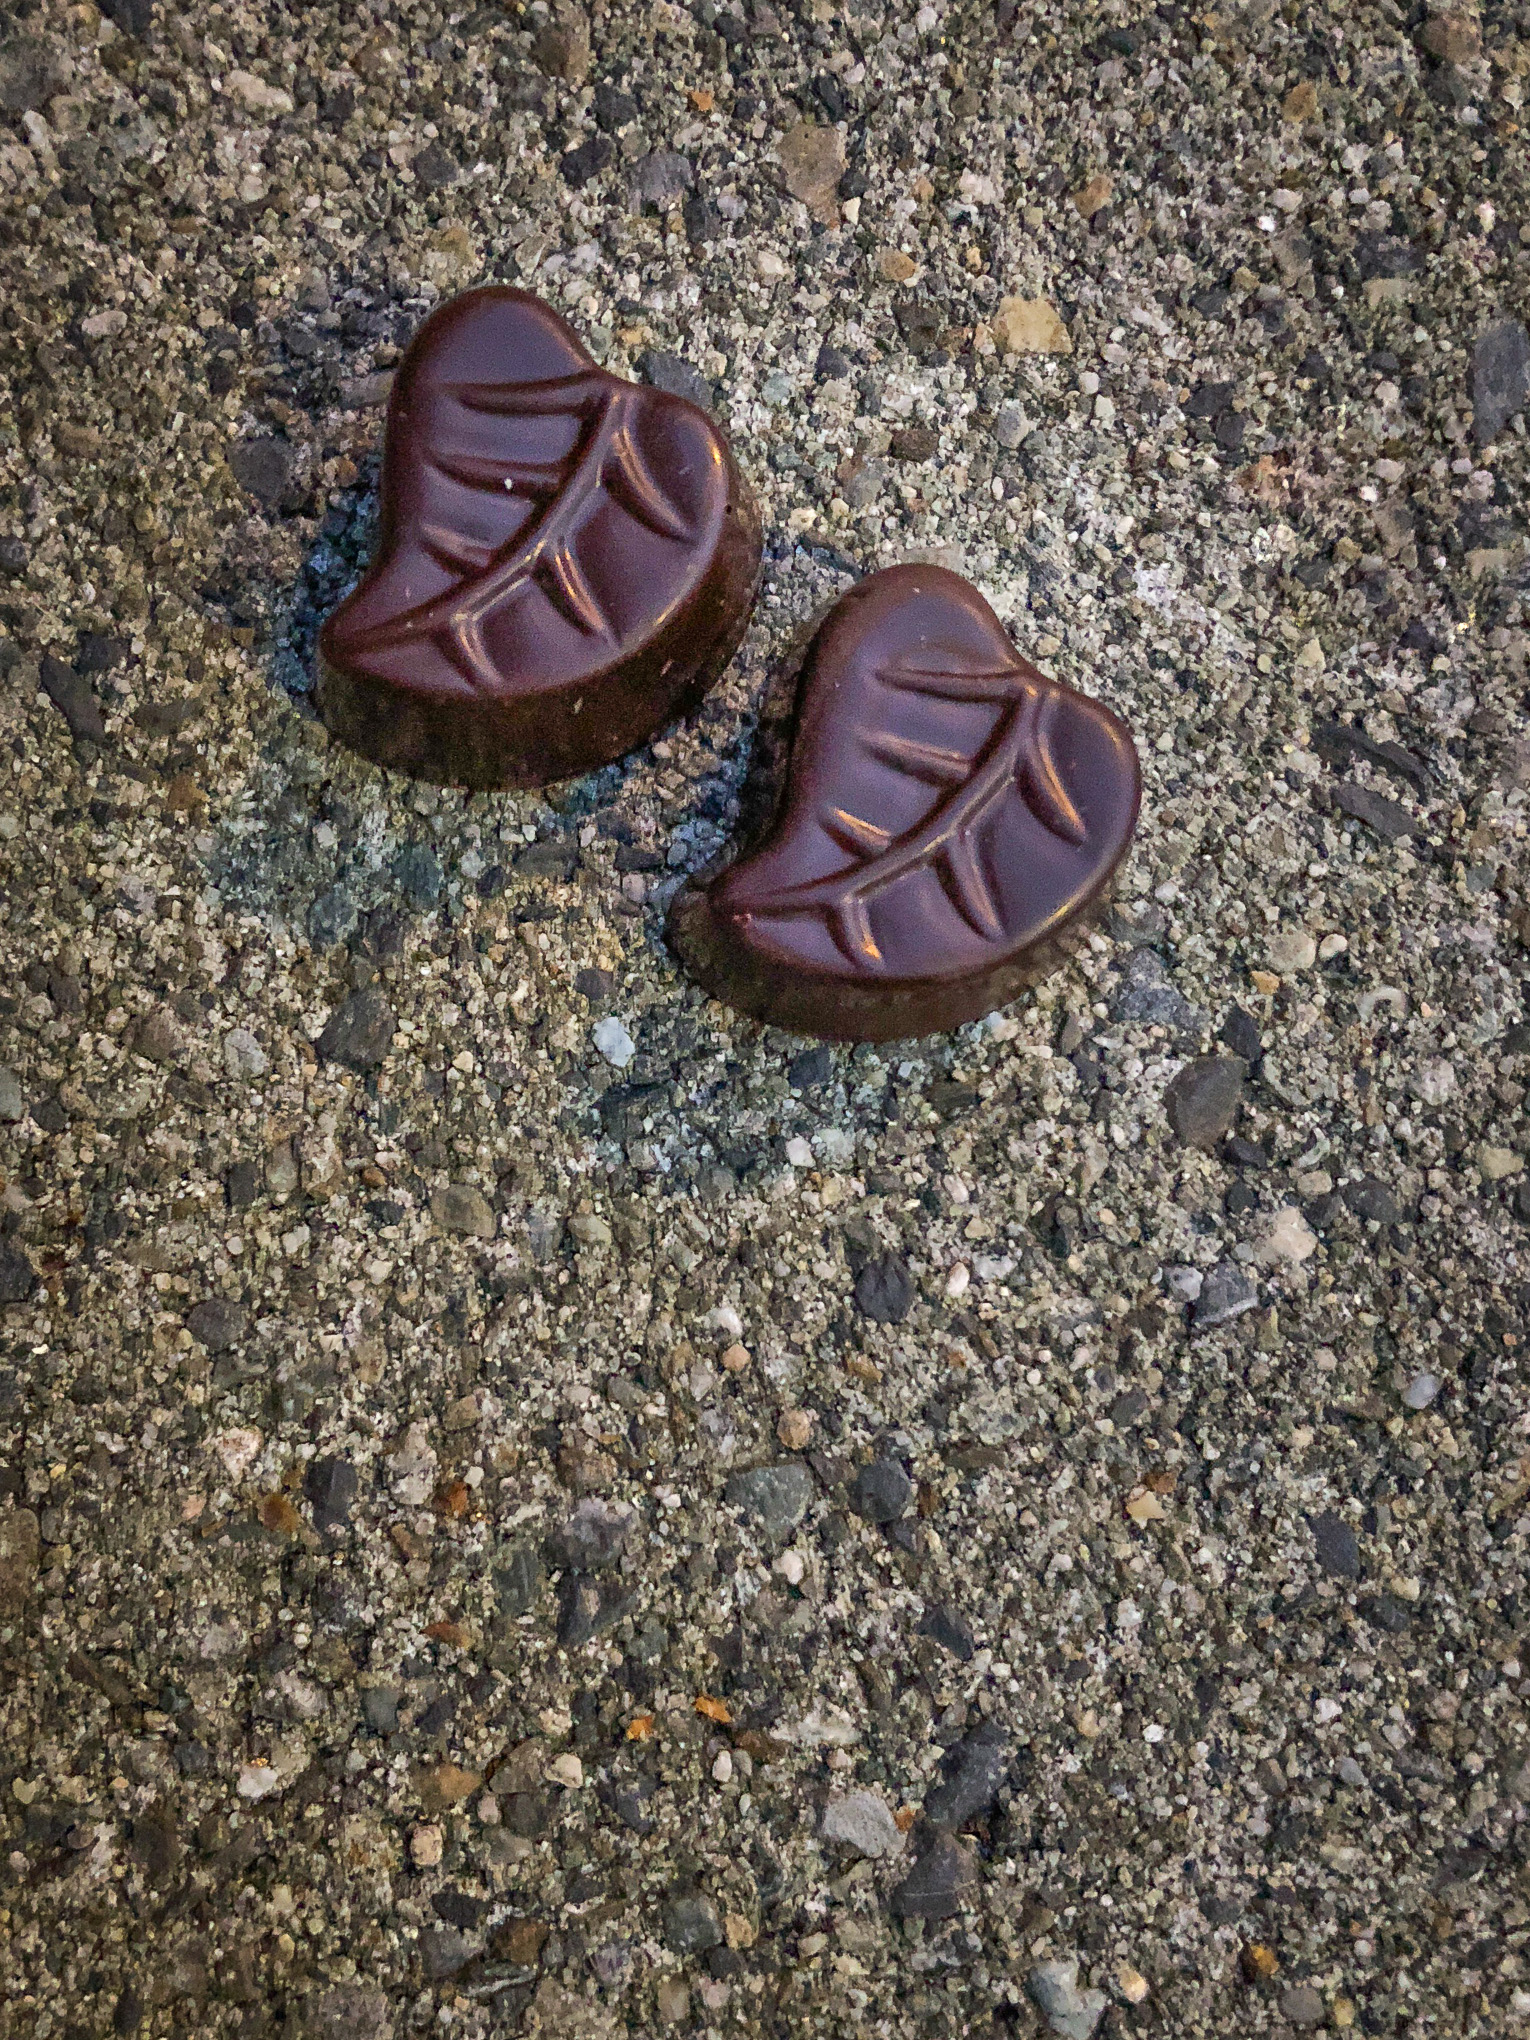 Two pieces of chocolate shaped like leaves